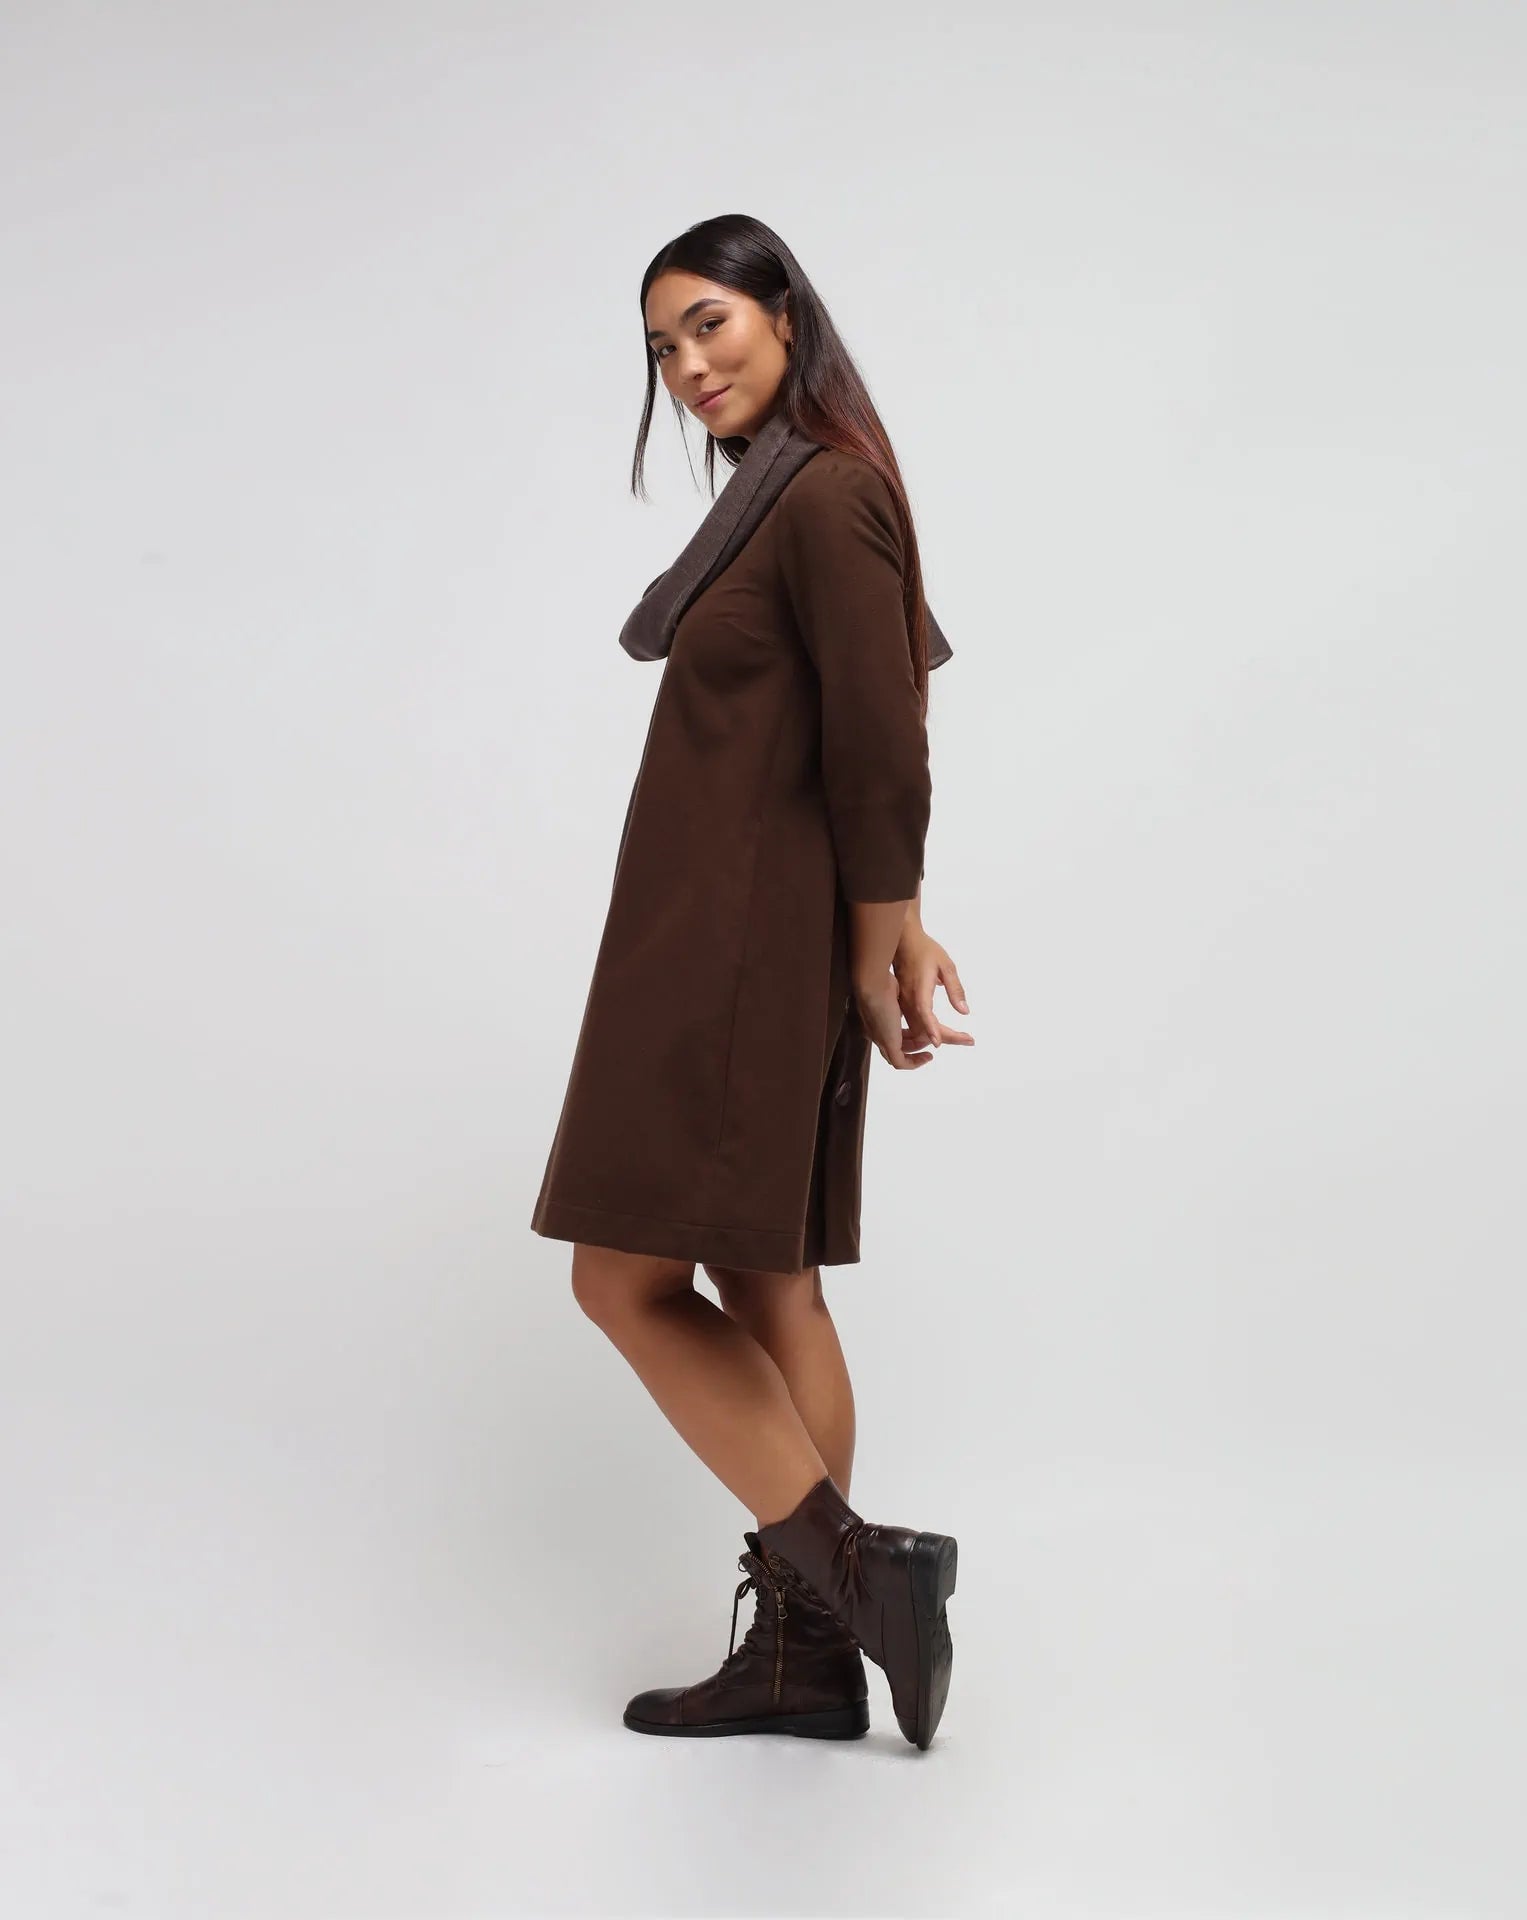 Flared Dress in Brown